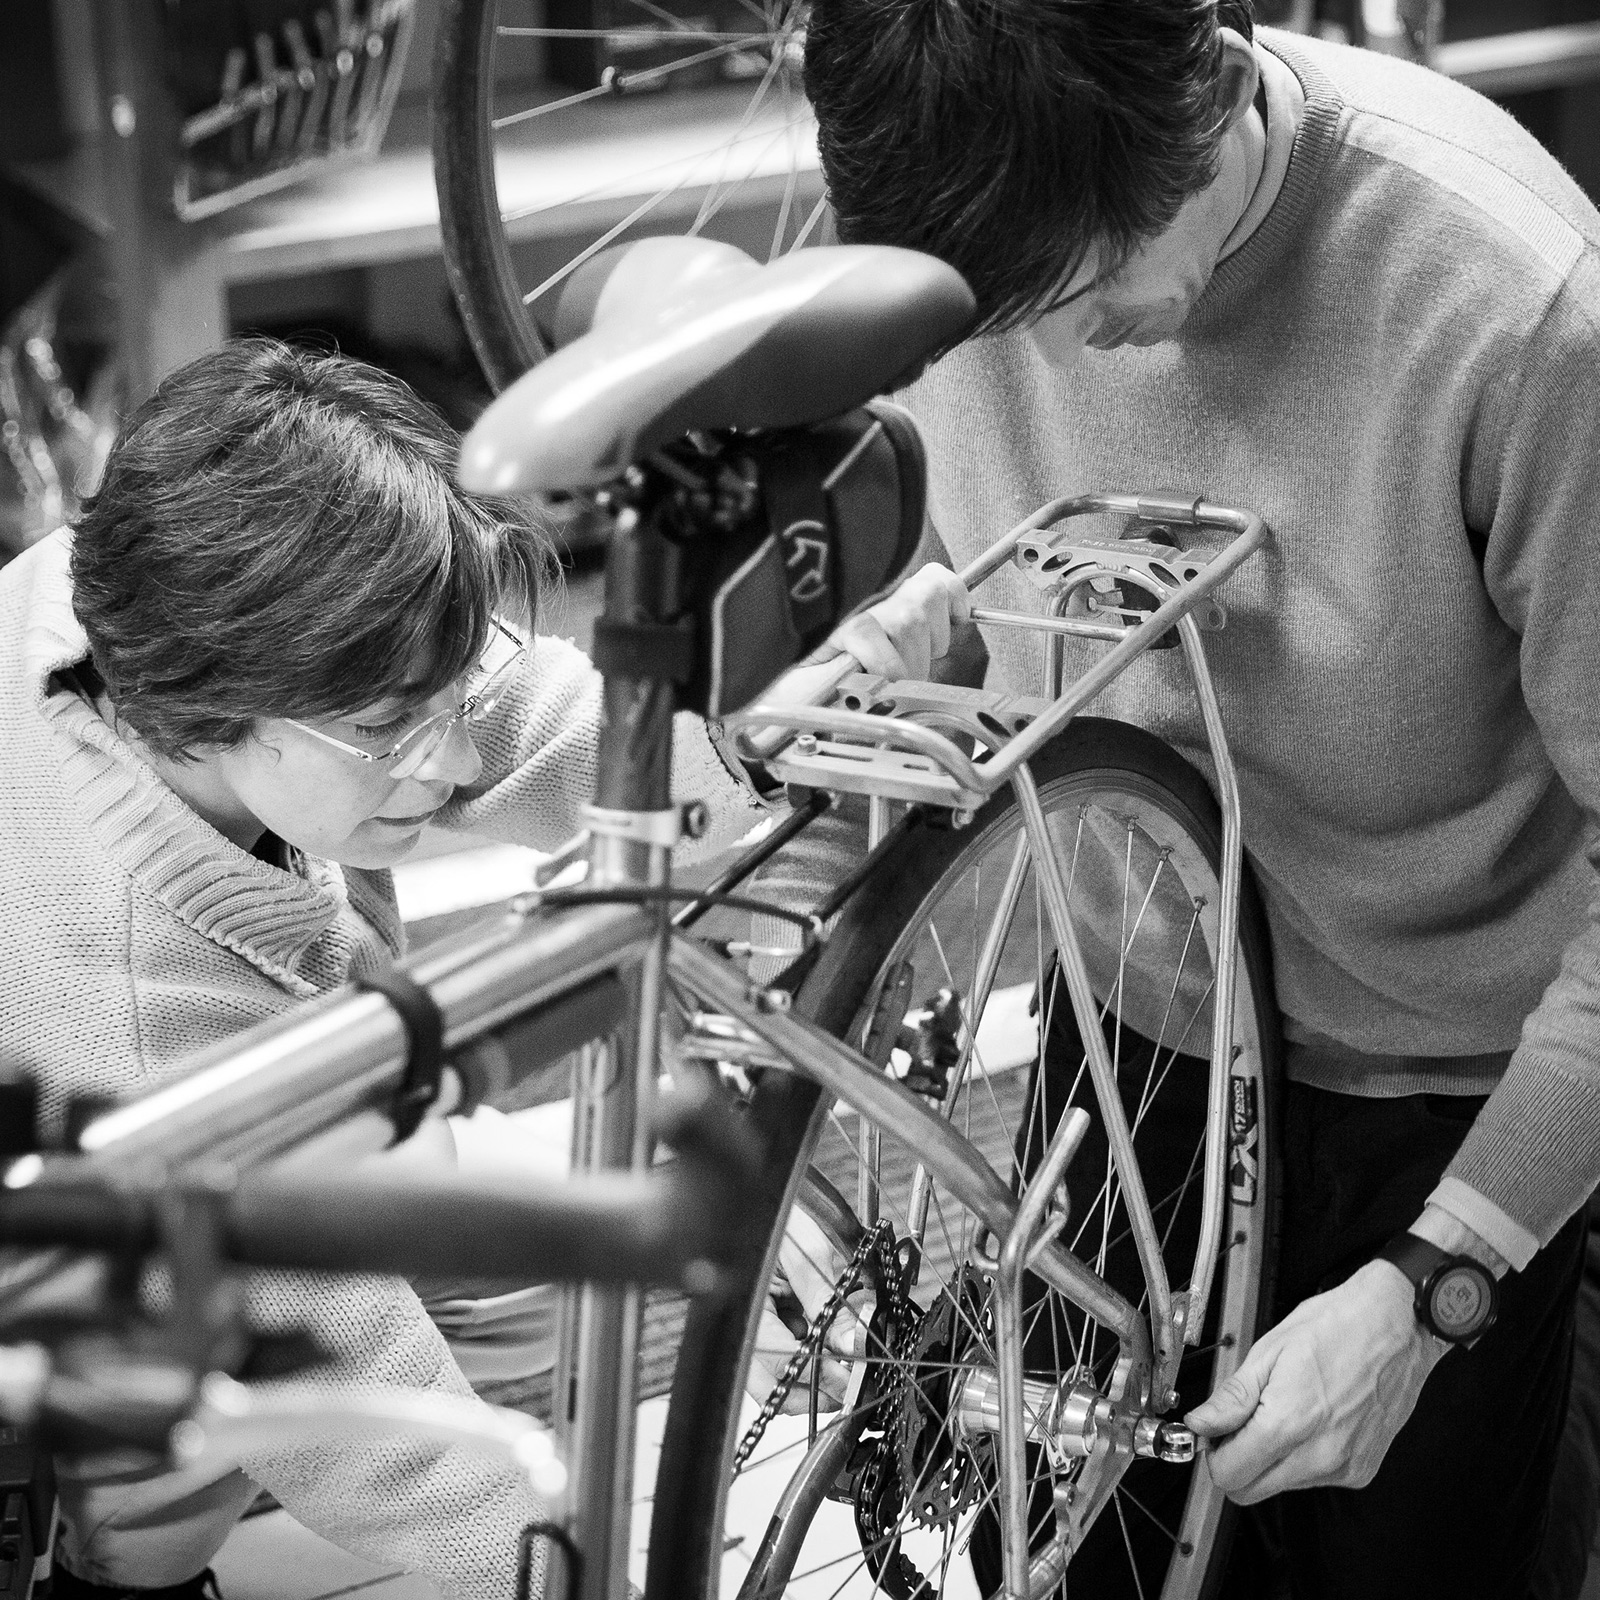 Mechanic skills are among many of the things we look for in tour leaders.